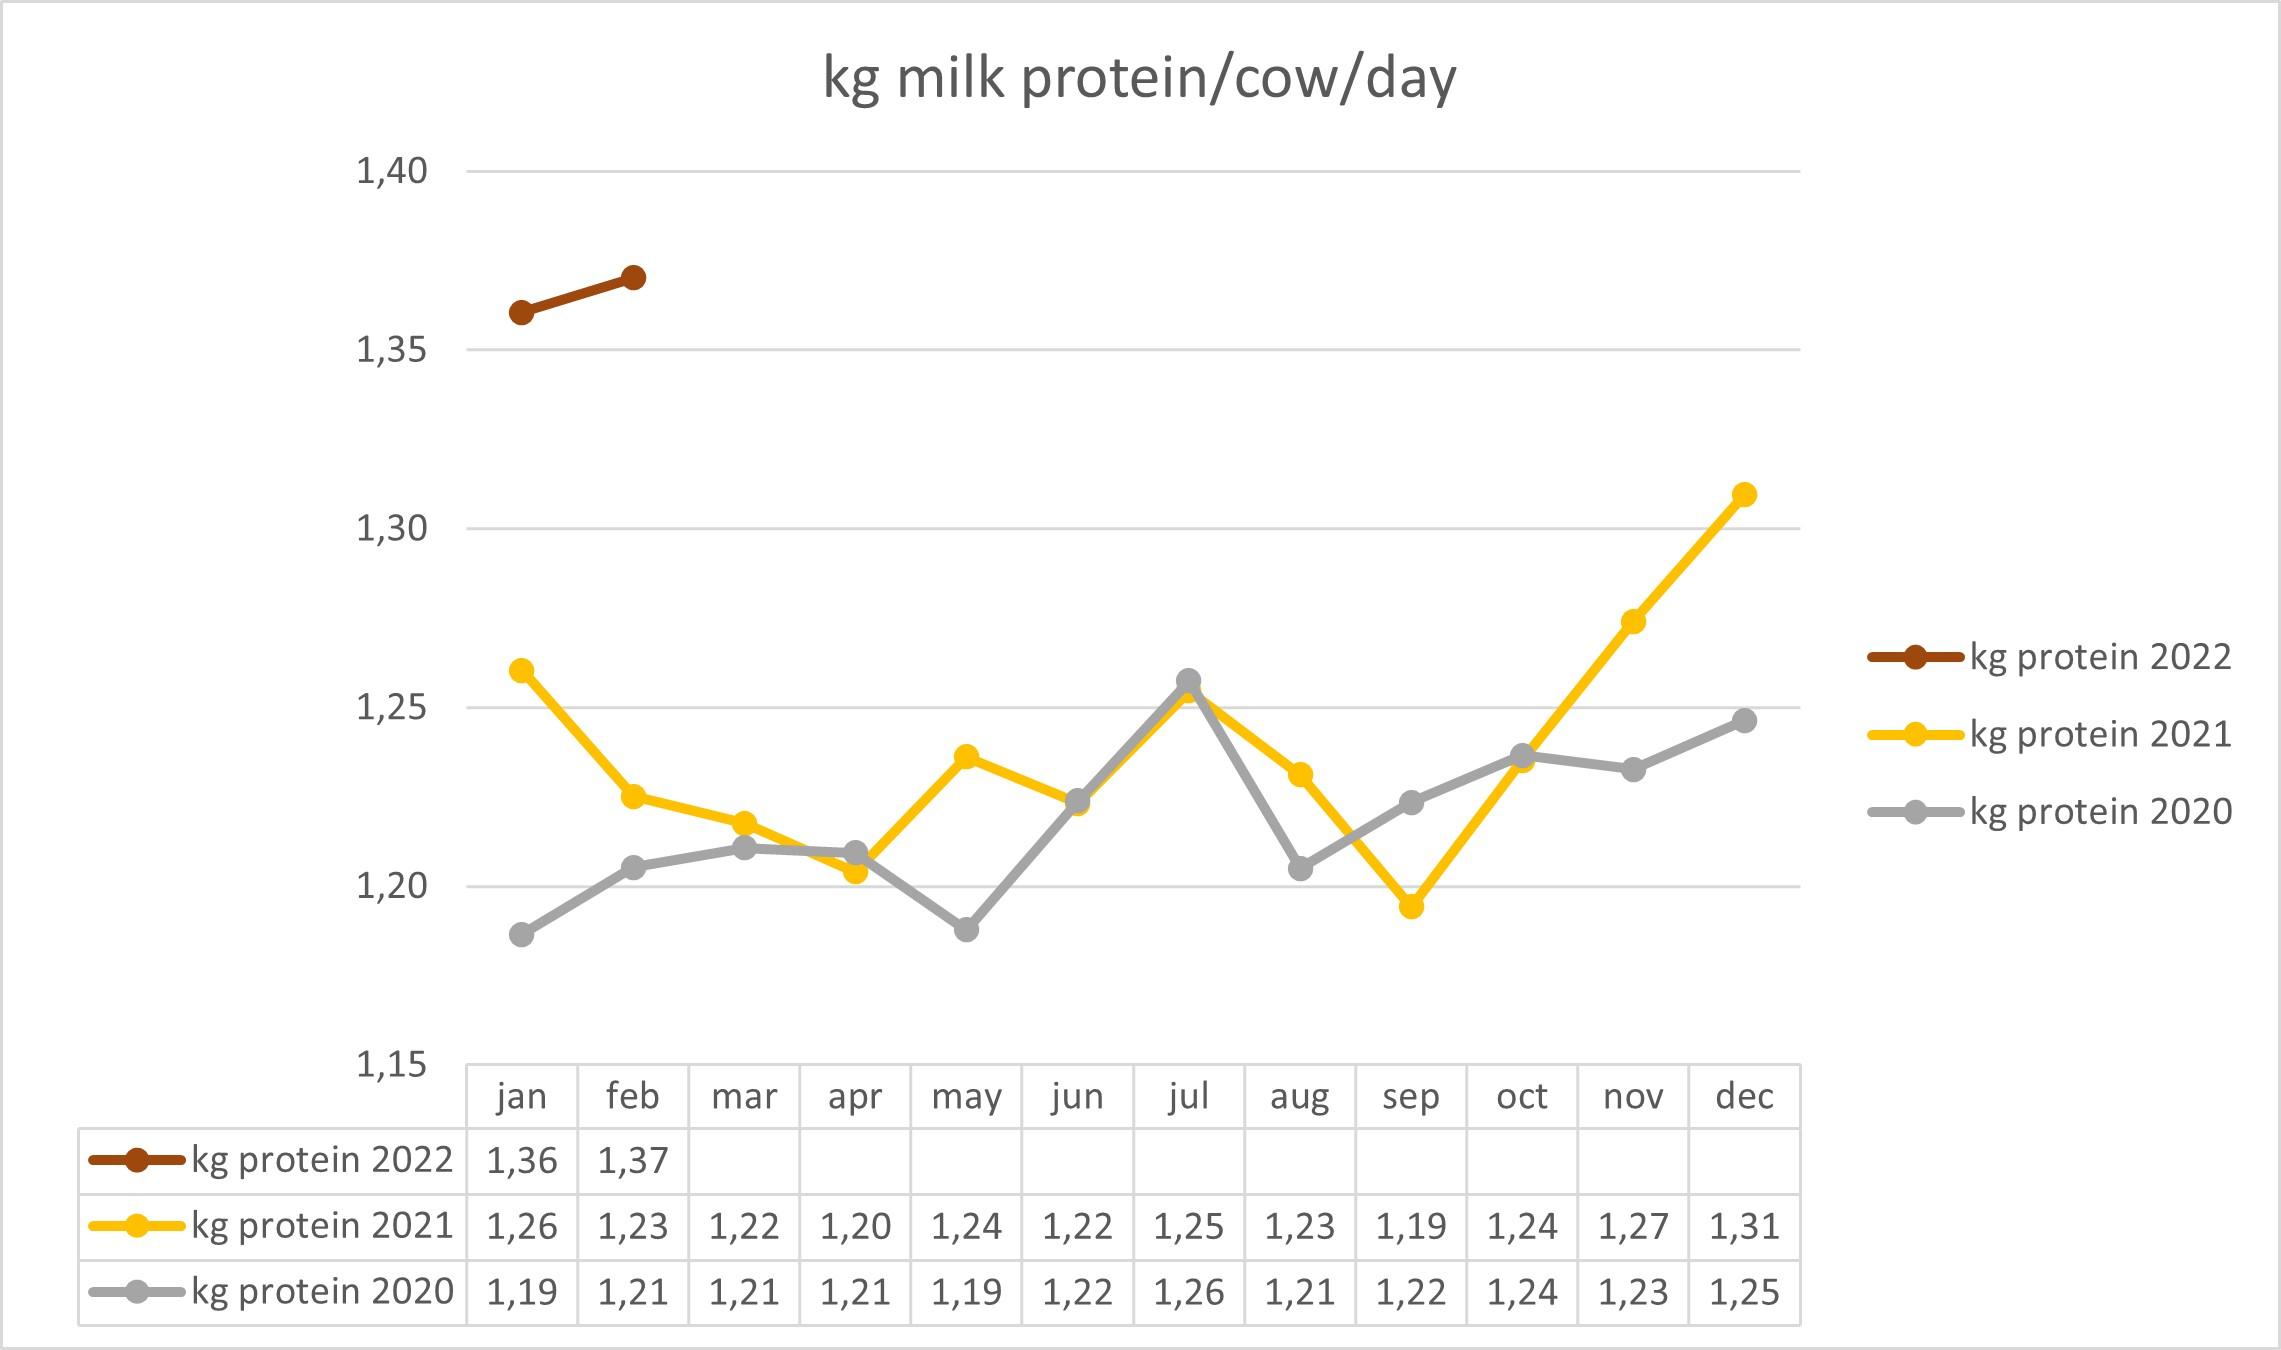 Animal feed is becoming increasingly expensive. The milk prices have been rising as well. Milk production can, however, be increased by adding an amino mix to your cows’ feed rations.  